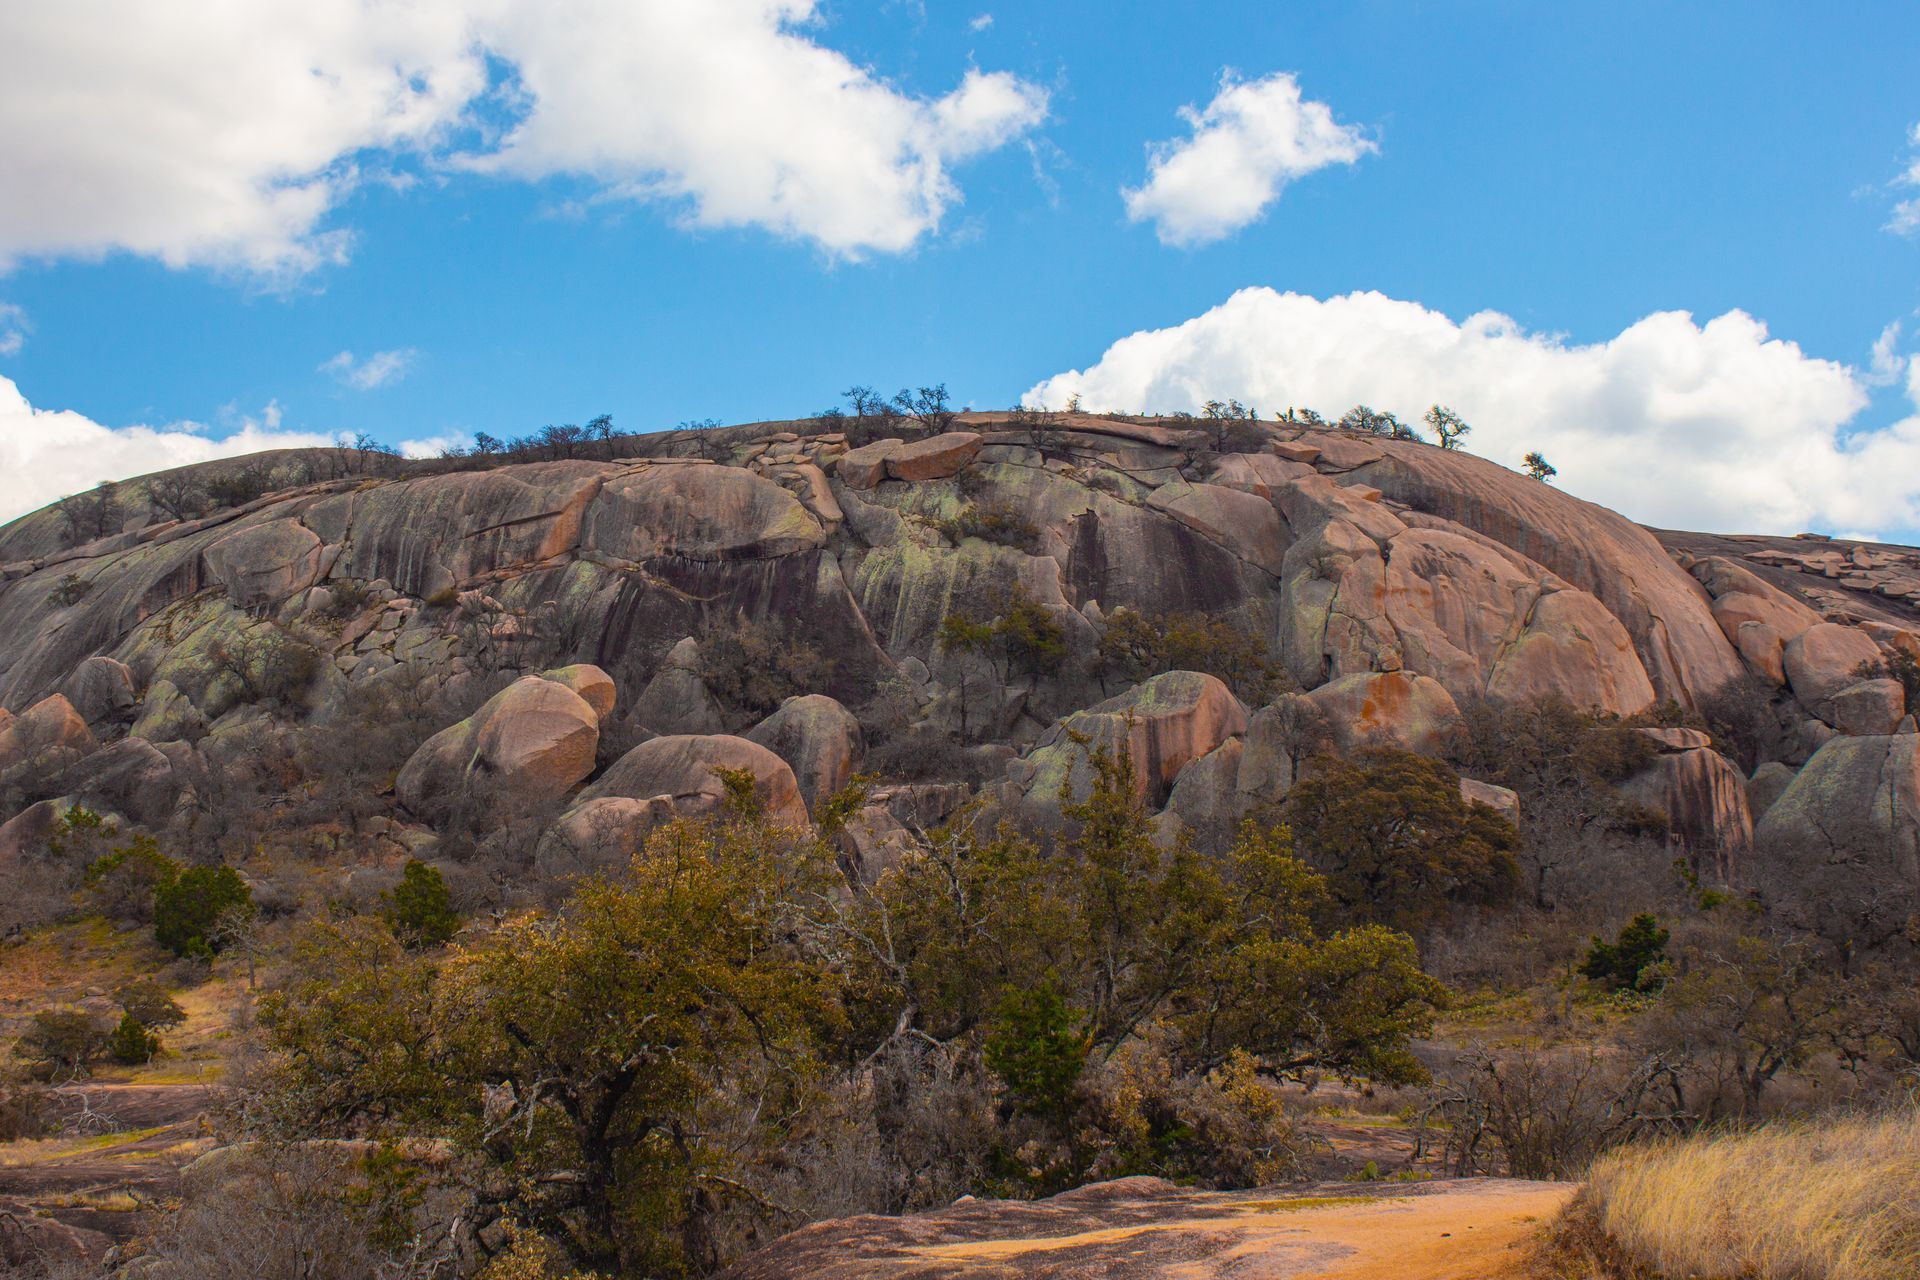 A large rocky hill with trees on it and a blue sky with clouds in the background.